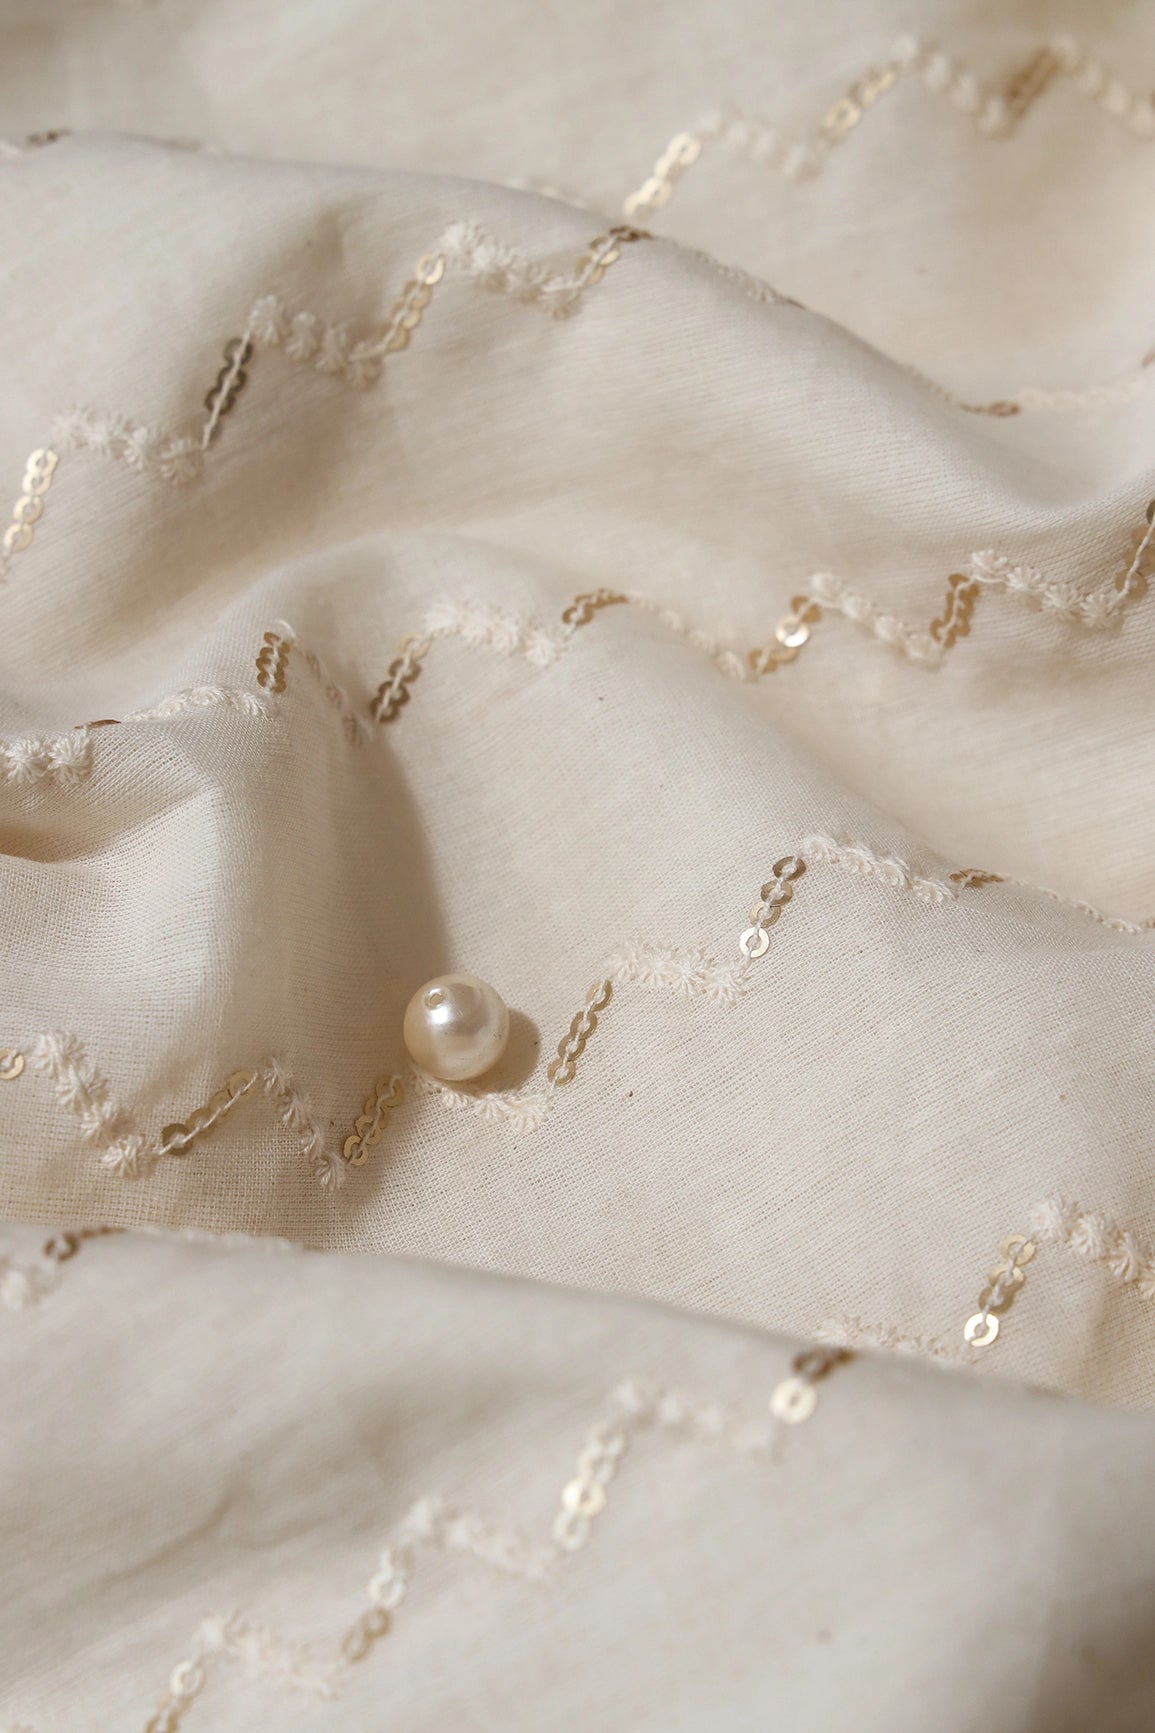 White Thread With Gold Sequins Small Chevron Embroidery Work On Off White Cotton Fabric - doeraa